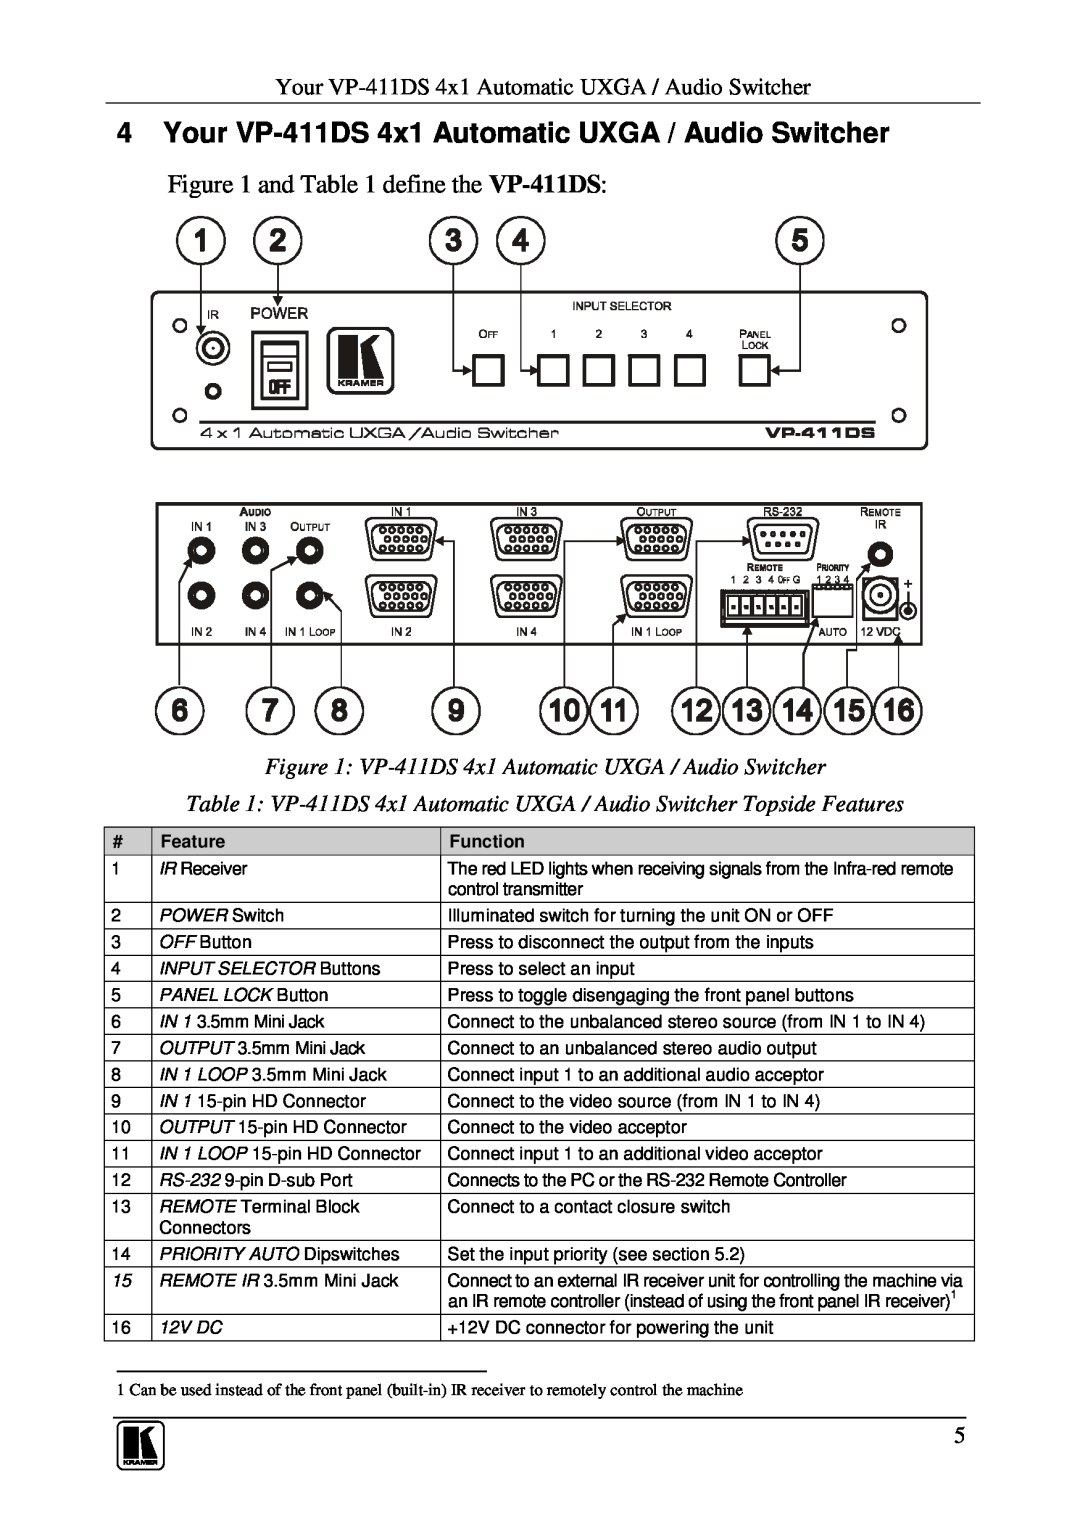 Kramer Electronics user manual 4Your VP-411DS4x1 Automatic UXGA / Audio Switcher, and define the VP-411DS 